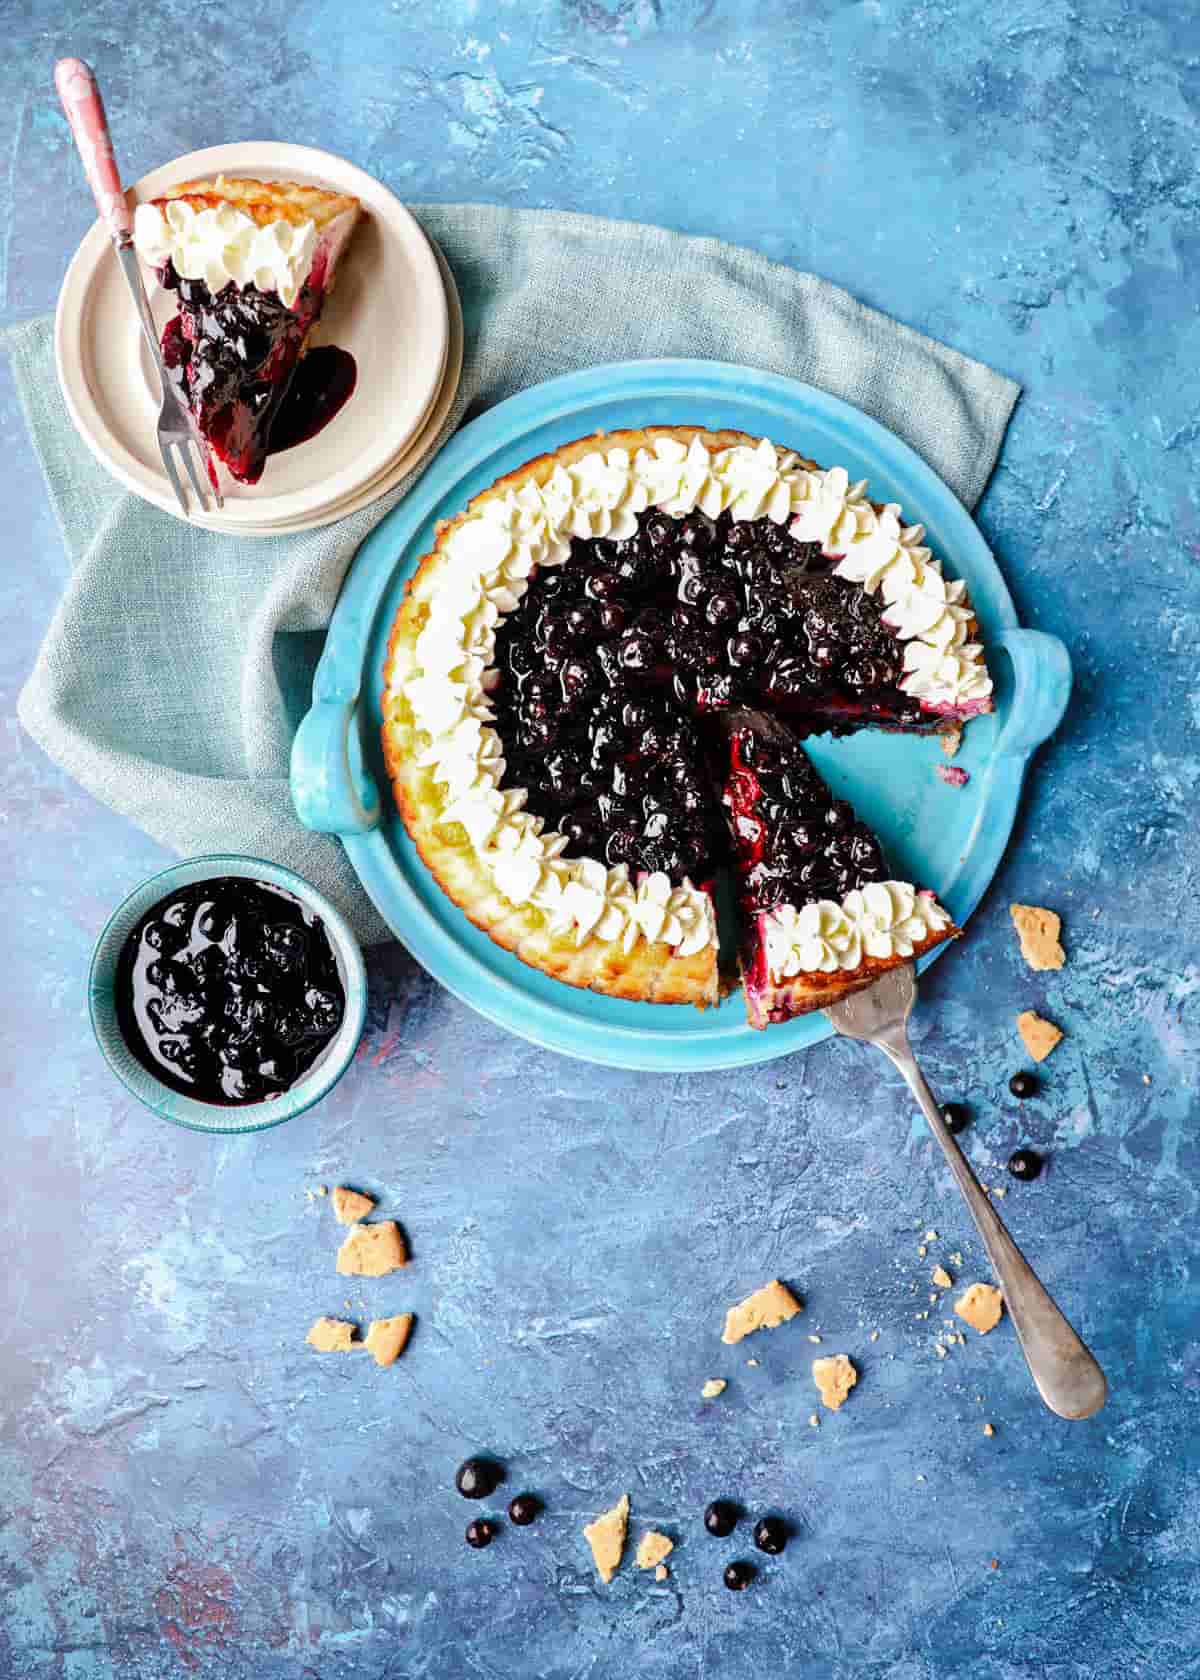 Blackcurrant Cheesecake with slice and blackcurrants